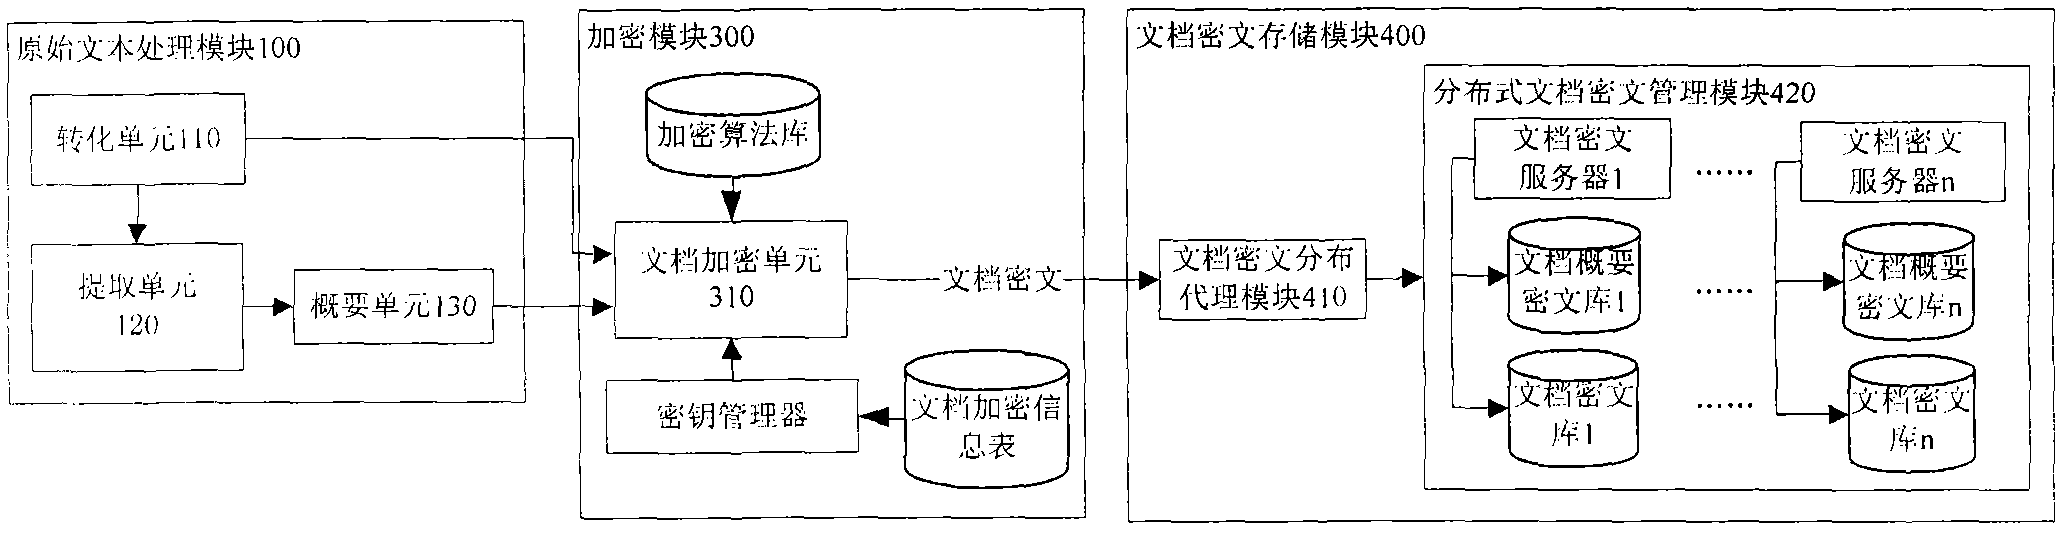 Index update method for ciphertext full-text searching system based on dynamic succeed tree index structure